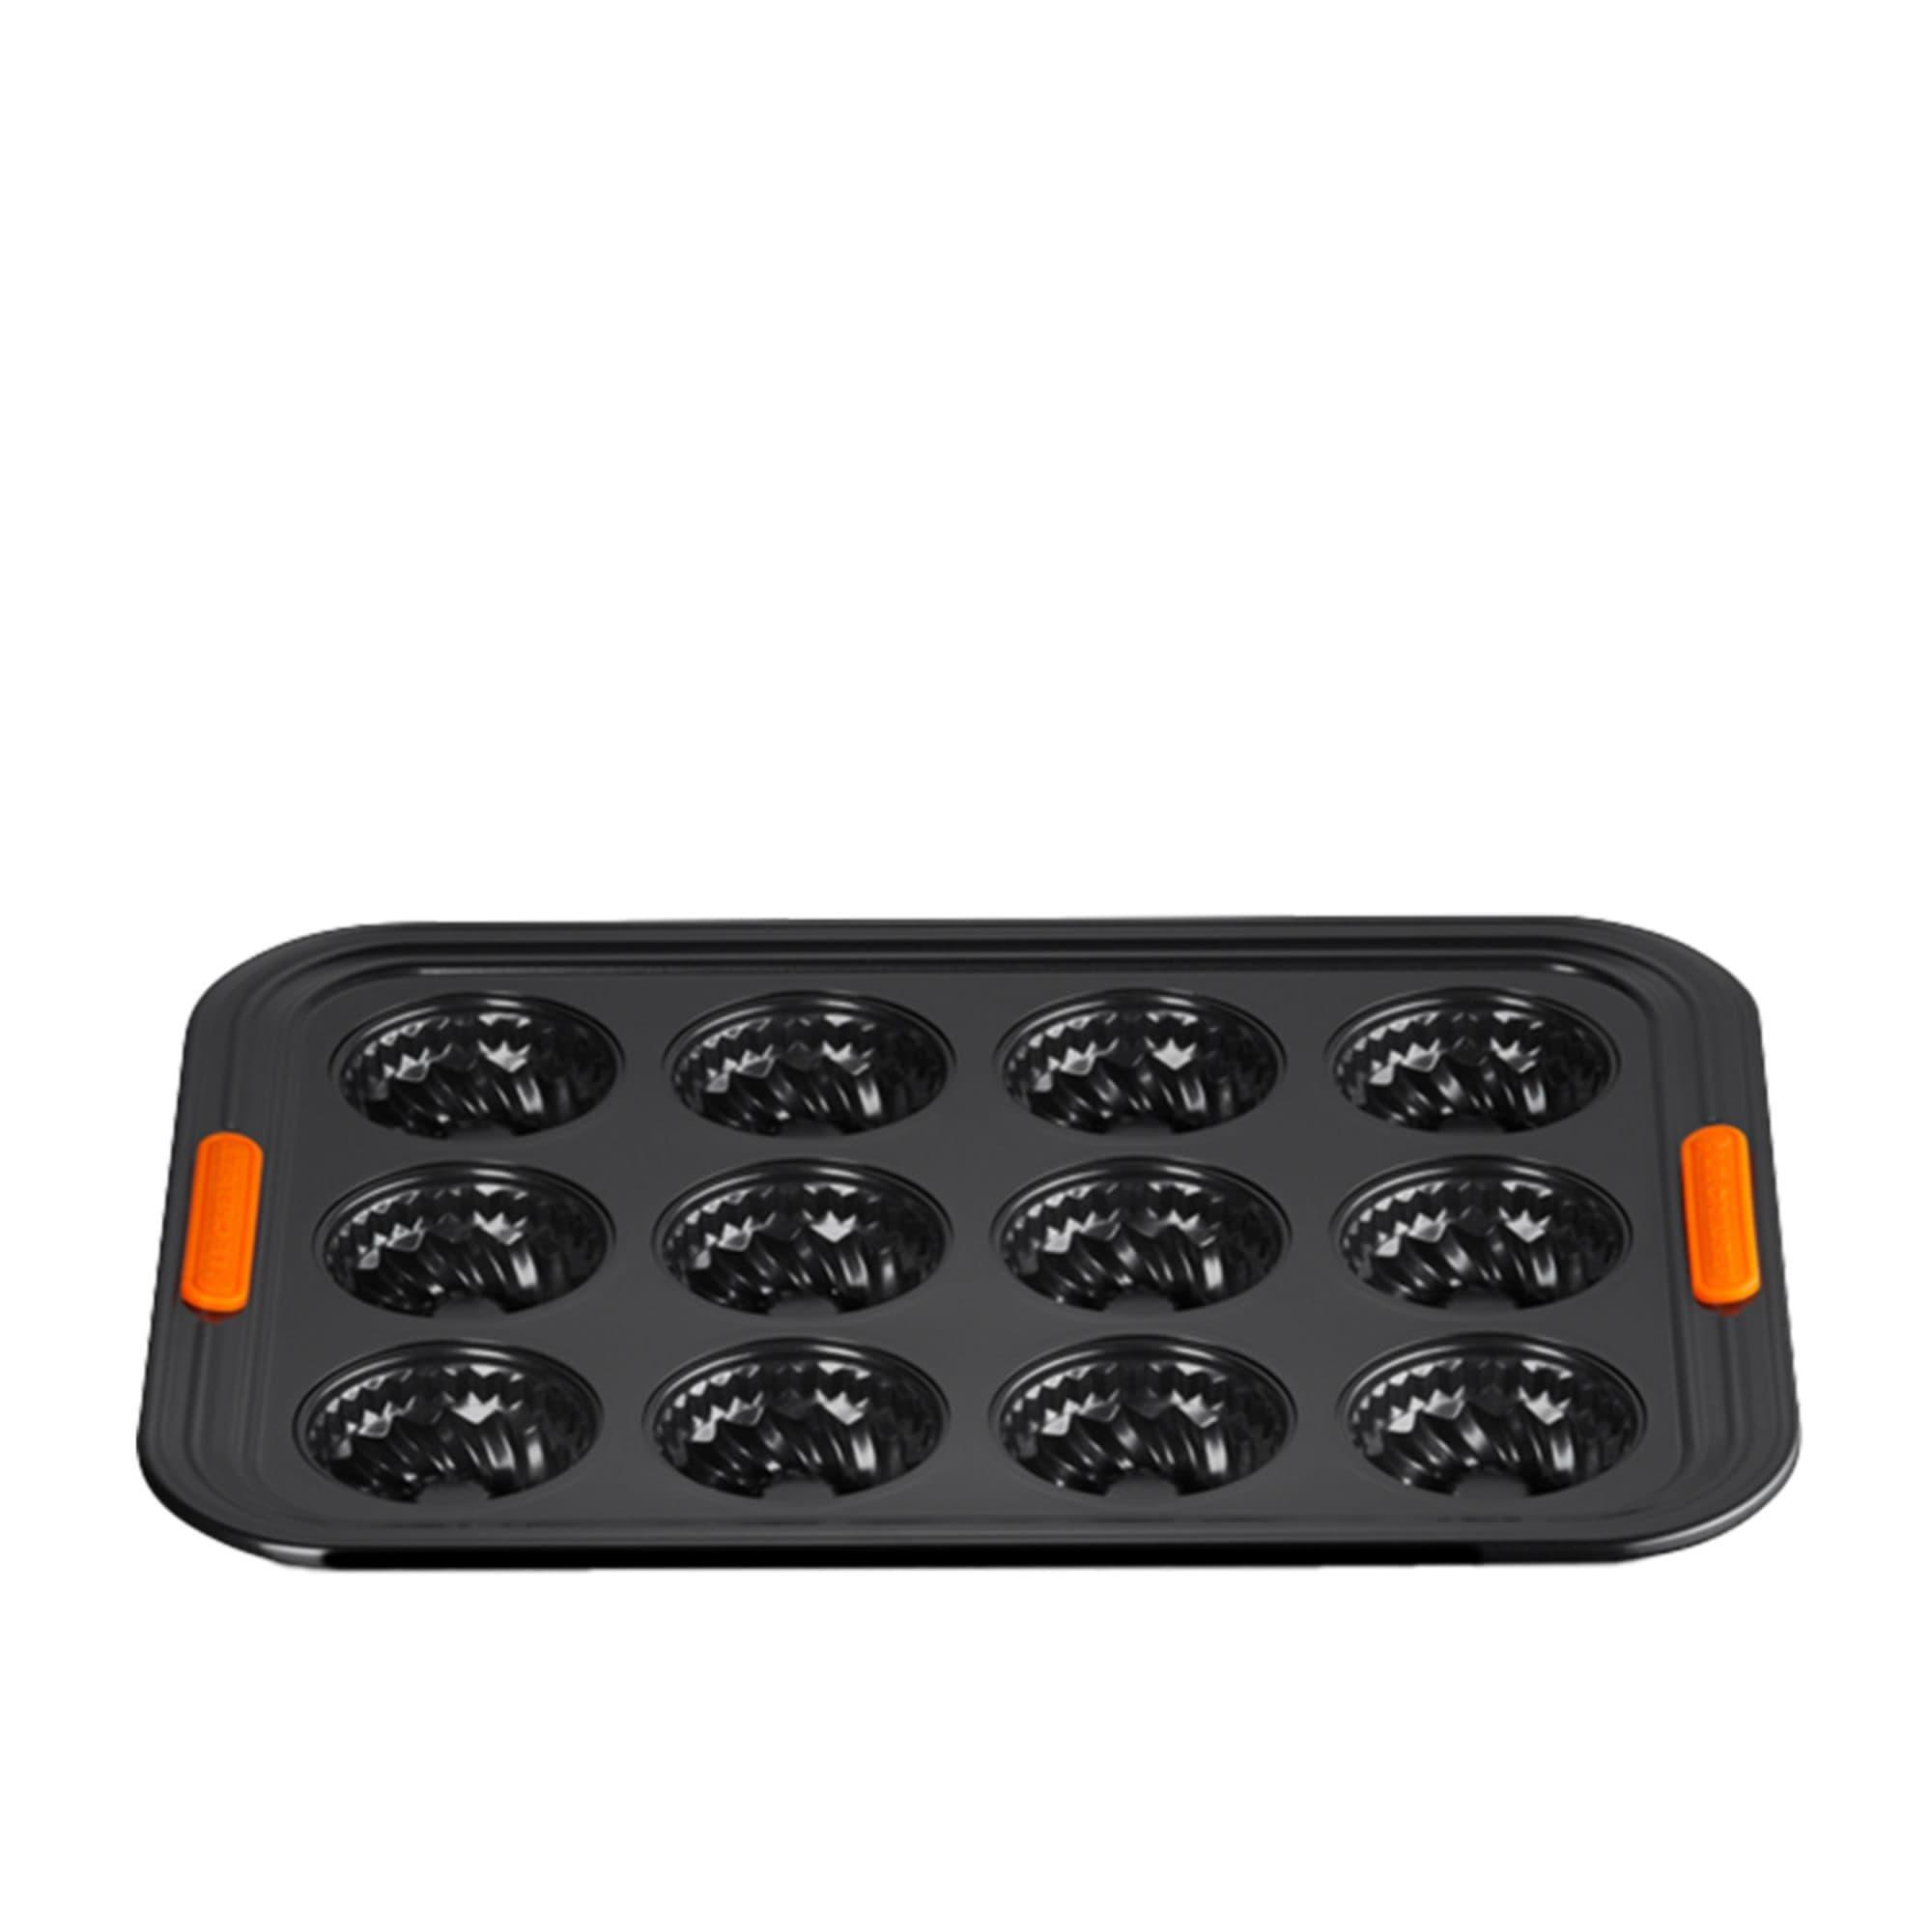 Le Creuset Toughened Non Stick 12 Cup Tube Tray 40x30cm Image 3